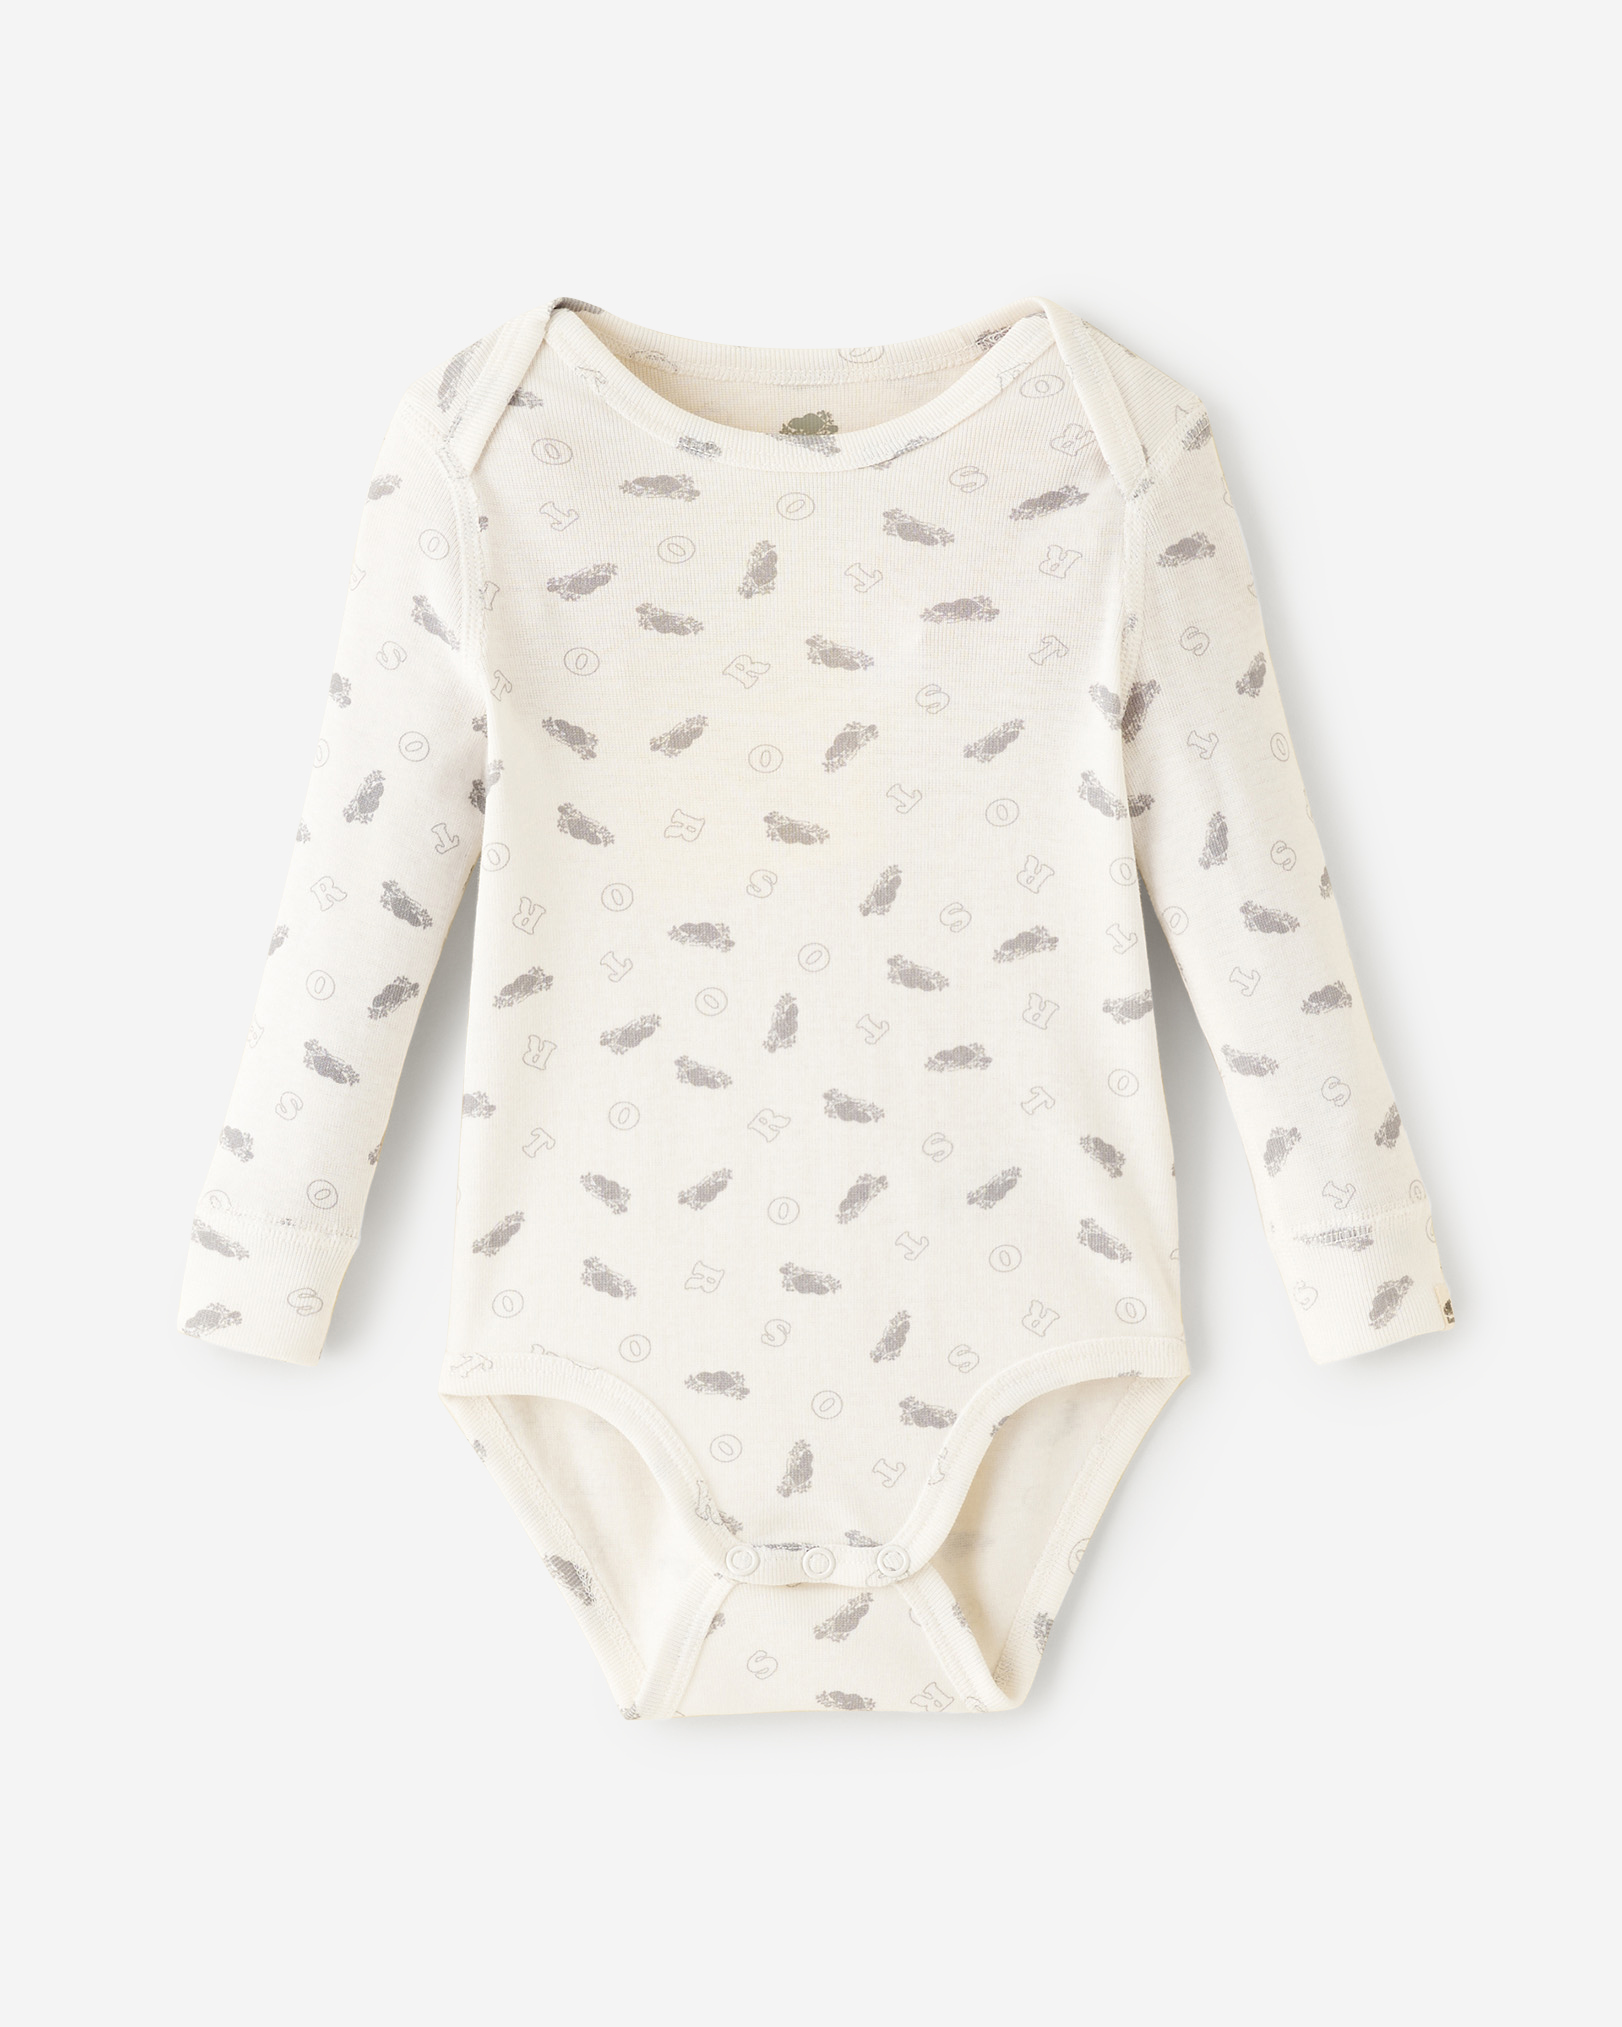 Roots Baby's First Bodysuit in Egret